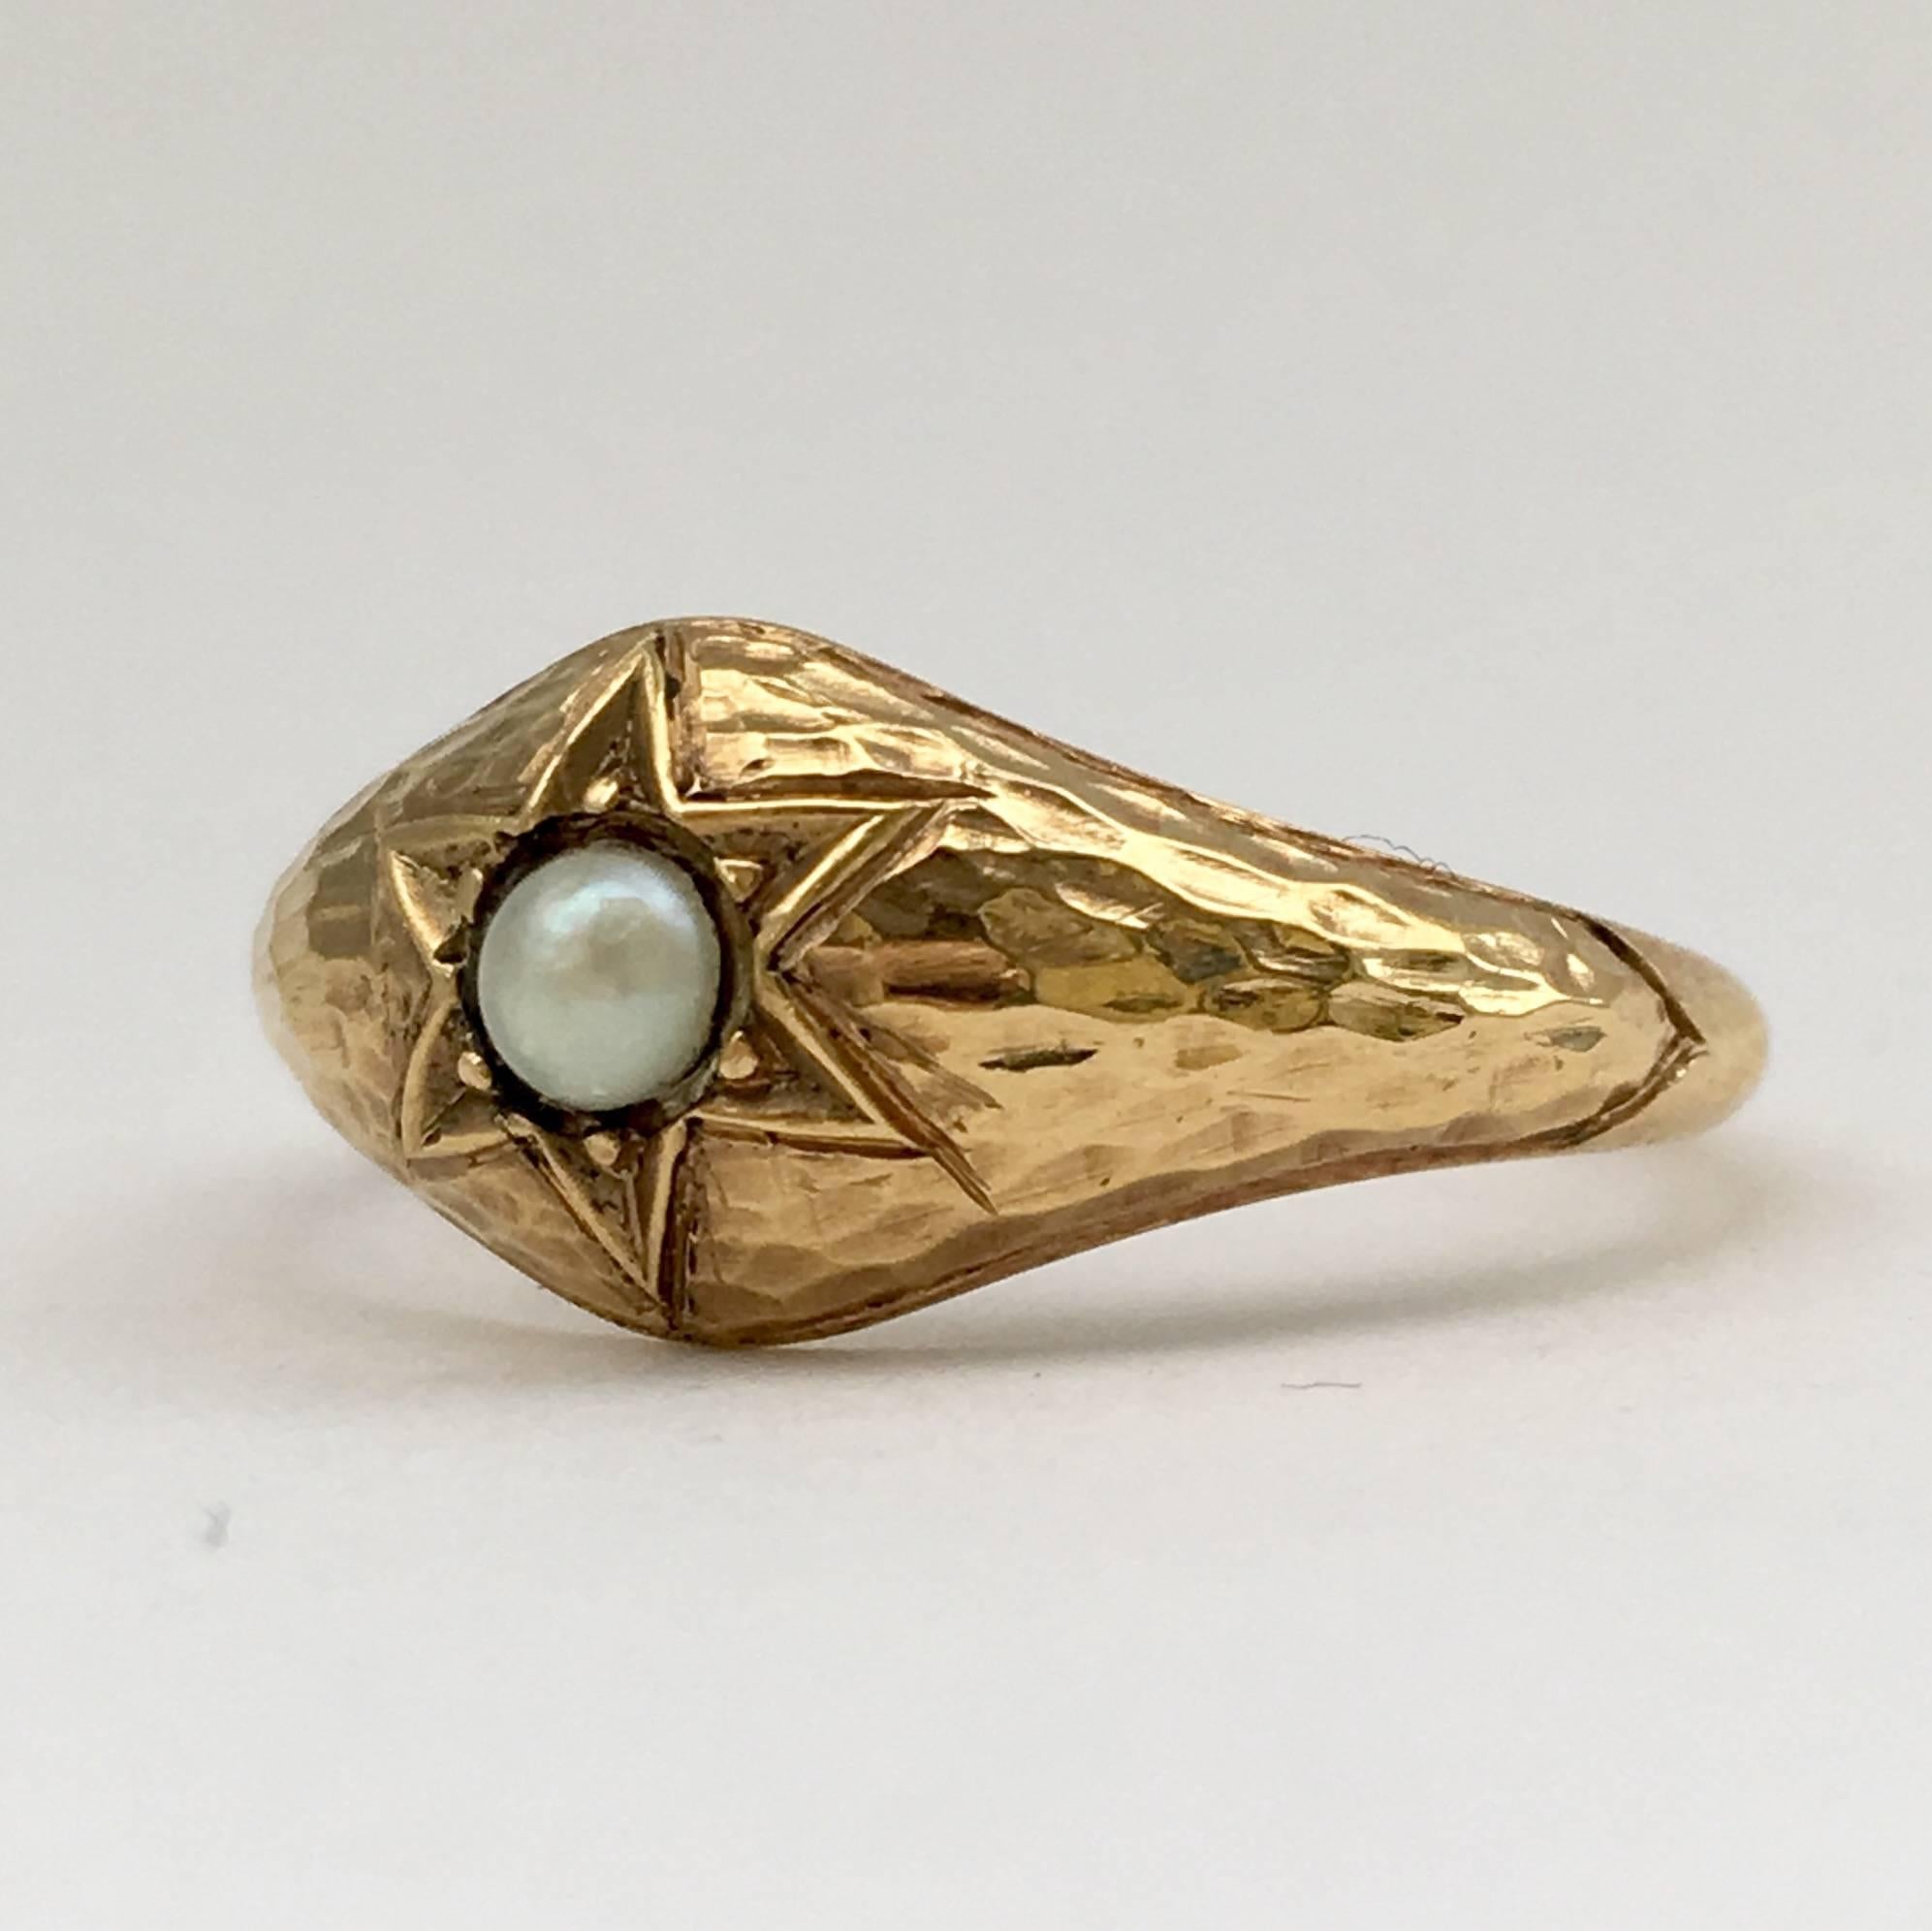 Pearl Ring Hammered Gold Antique Jewelry Vintage Star Signet Rings Celestial 1